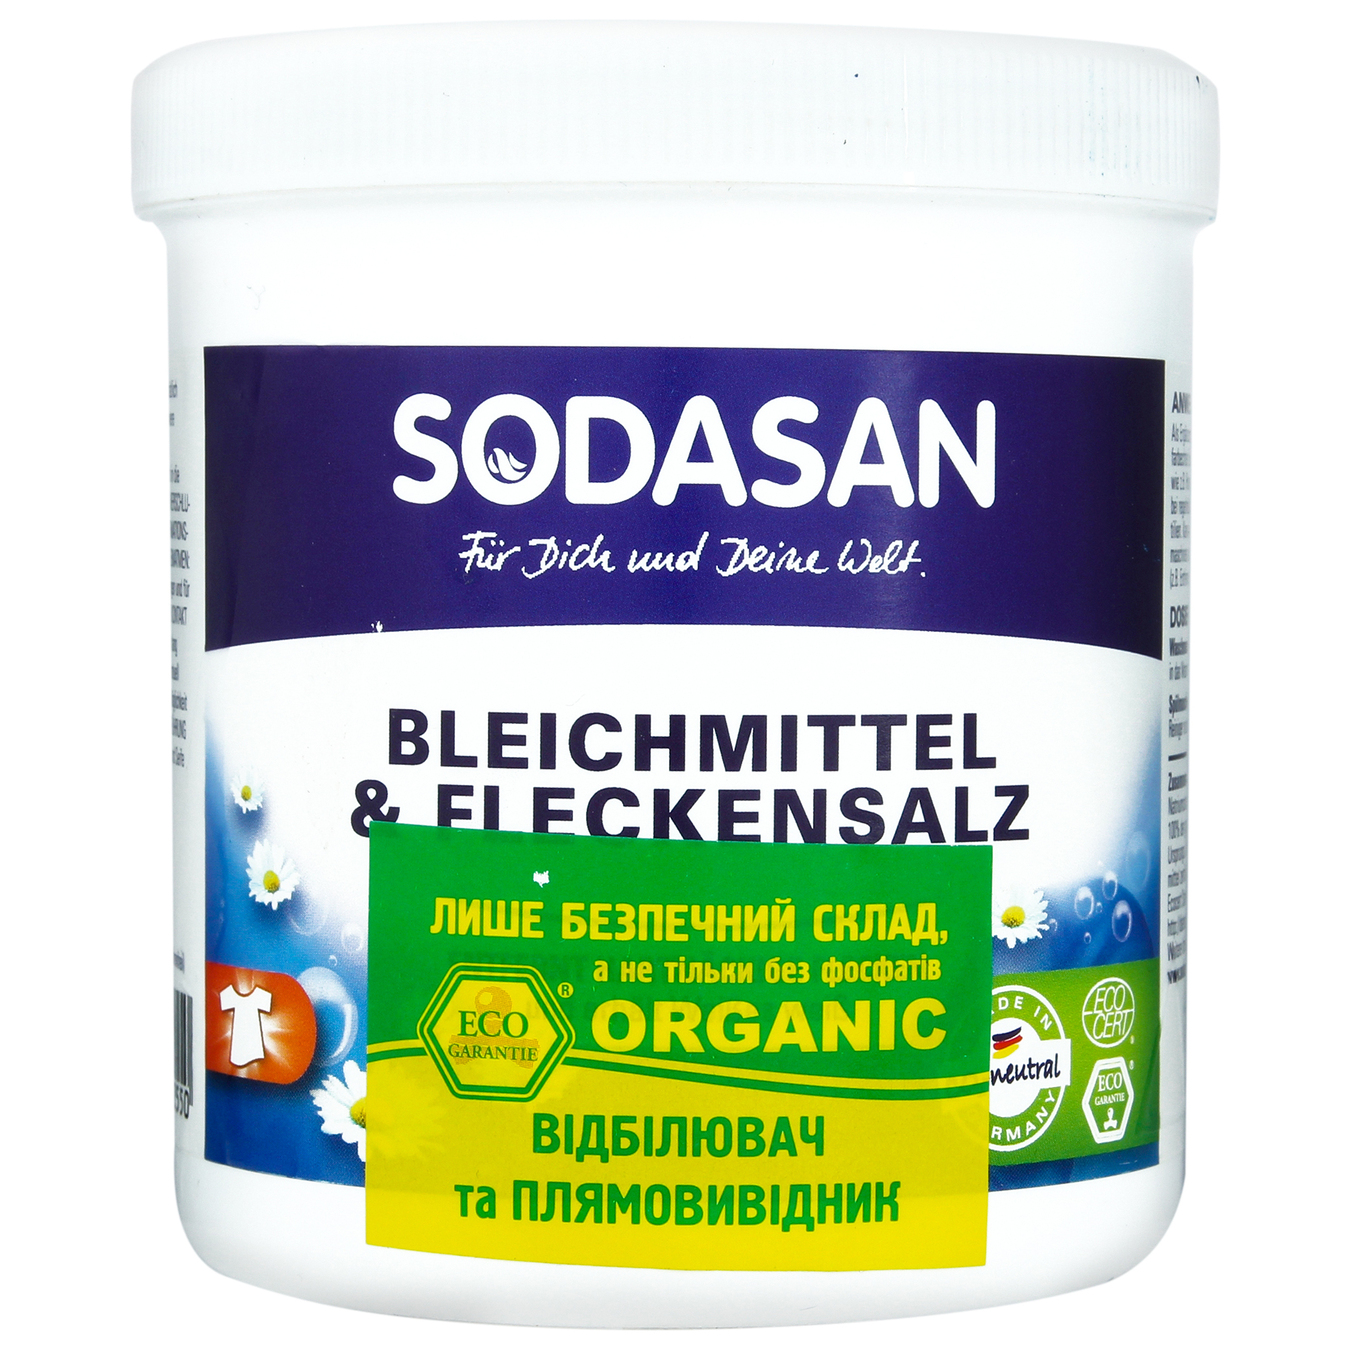 Sodasan means for bleaching and removing persistent impurities organic oxygen 500g